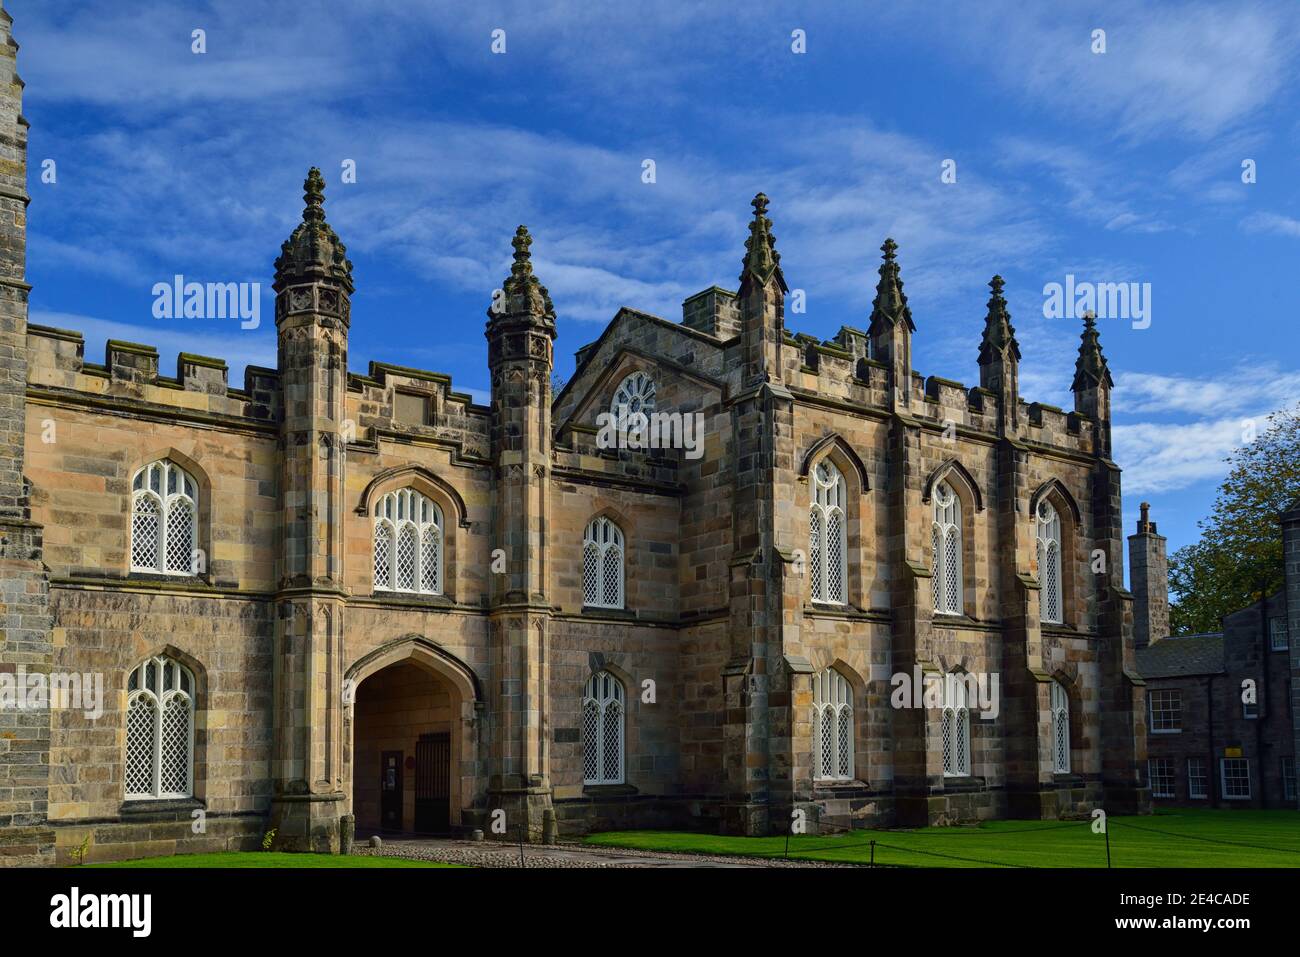 New King's Building, University of Aberdeen, Old Aberdeen, Scotland. United Kingdom of Great Britain Stock Photo